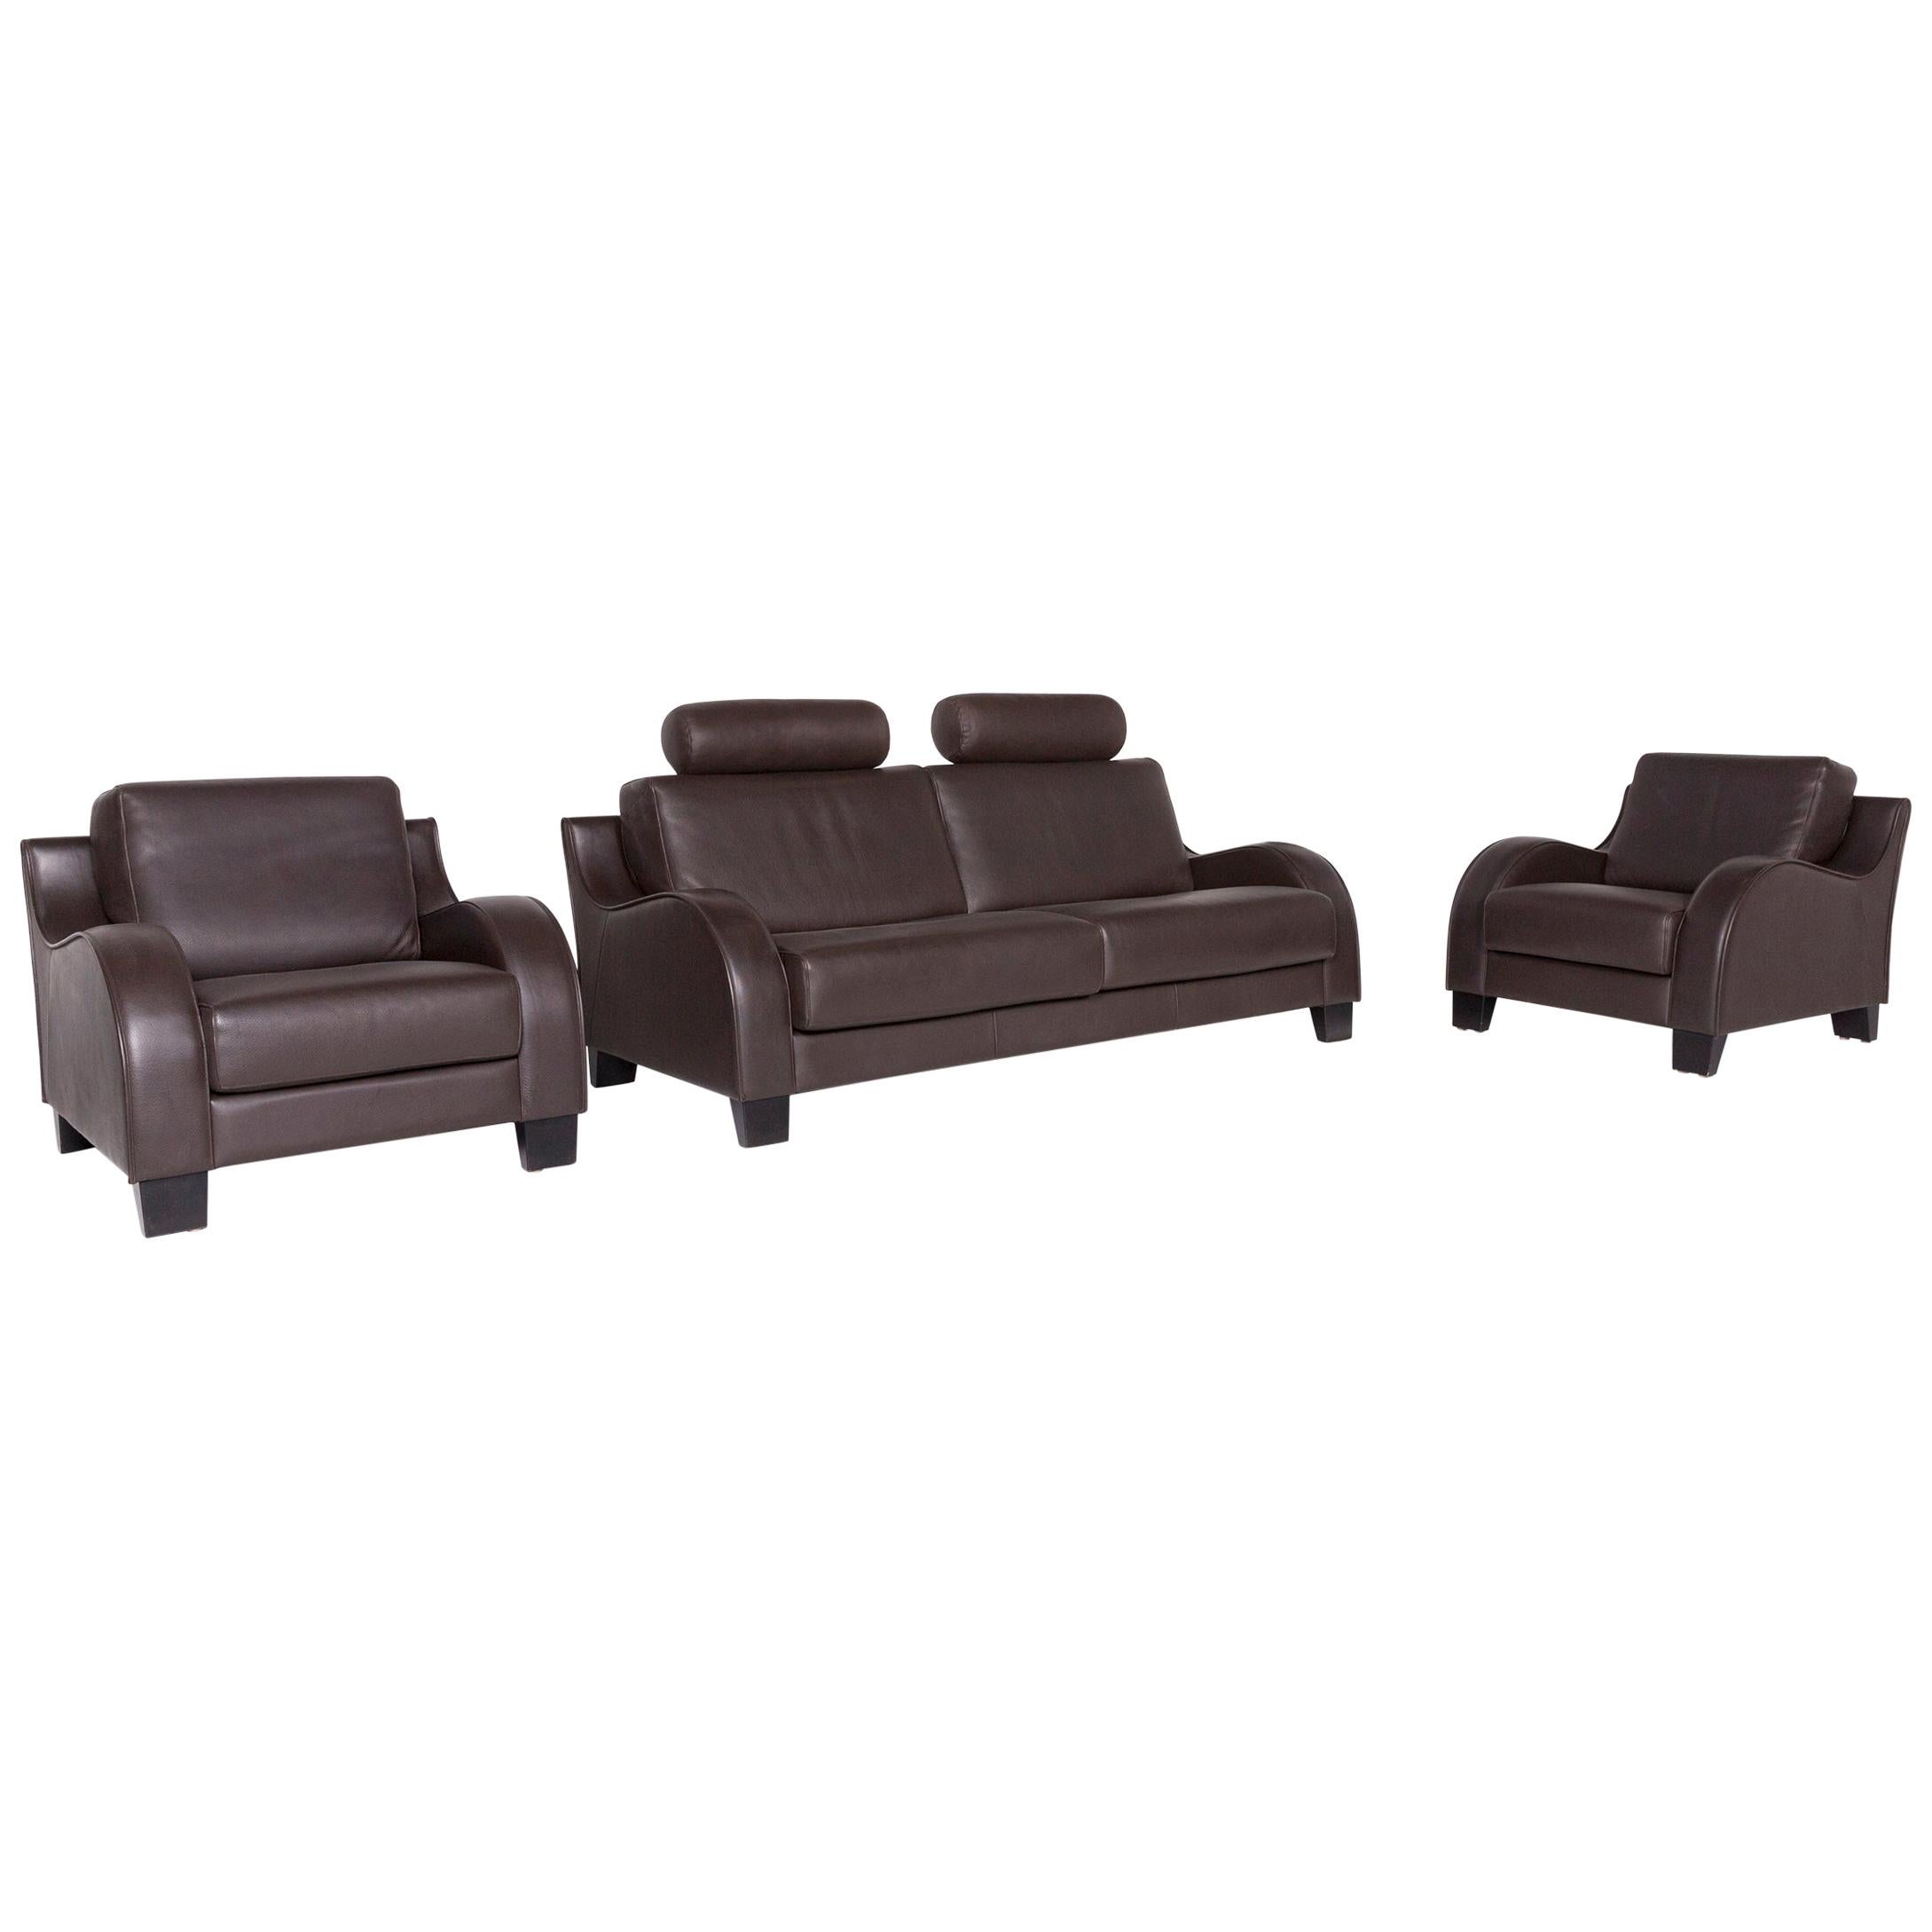 De Sede Ds 122 Leather Sofa Set Brown Dark Brown 1 Two-Seat 2 Armchair For Sale